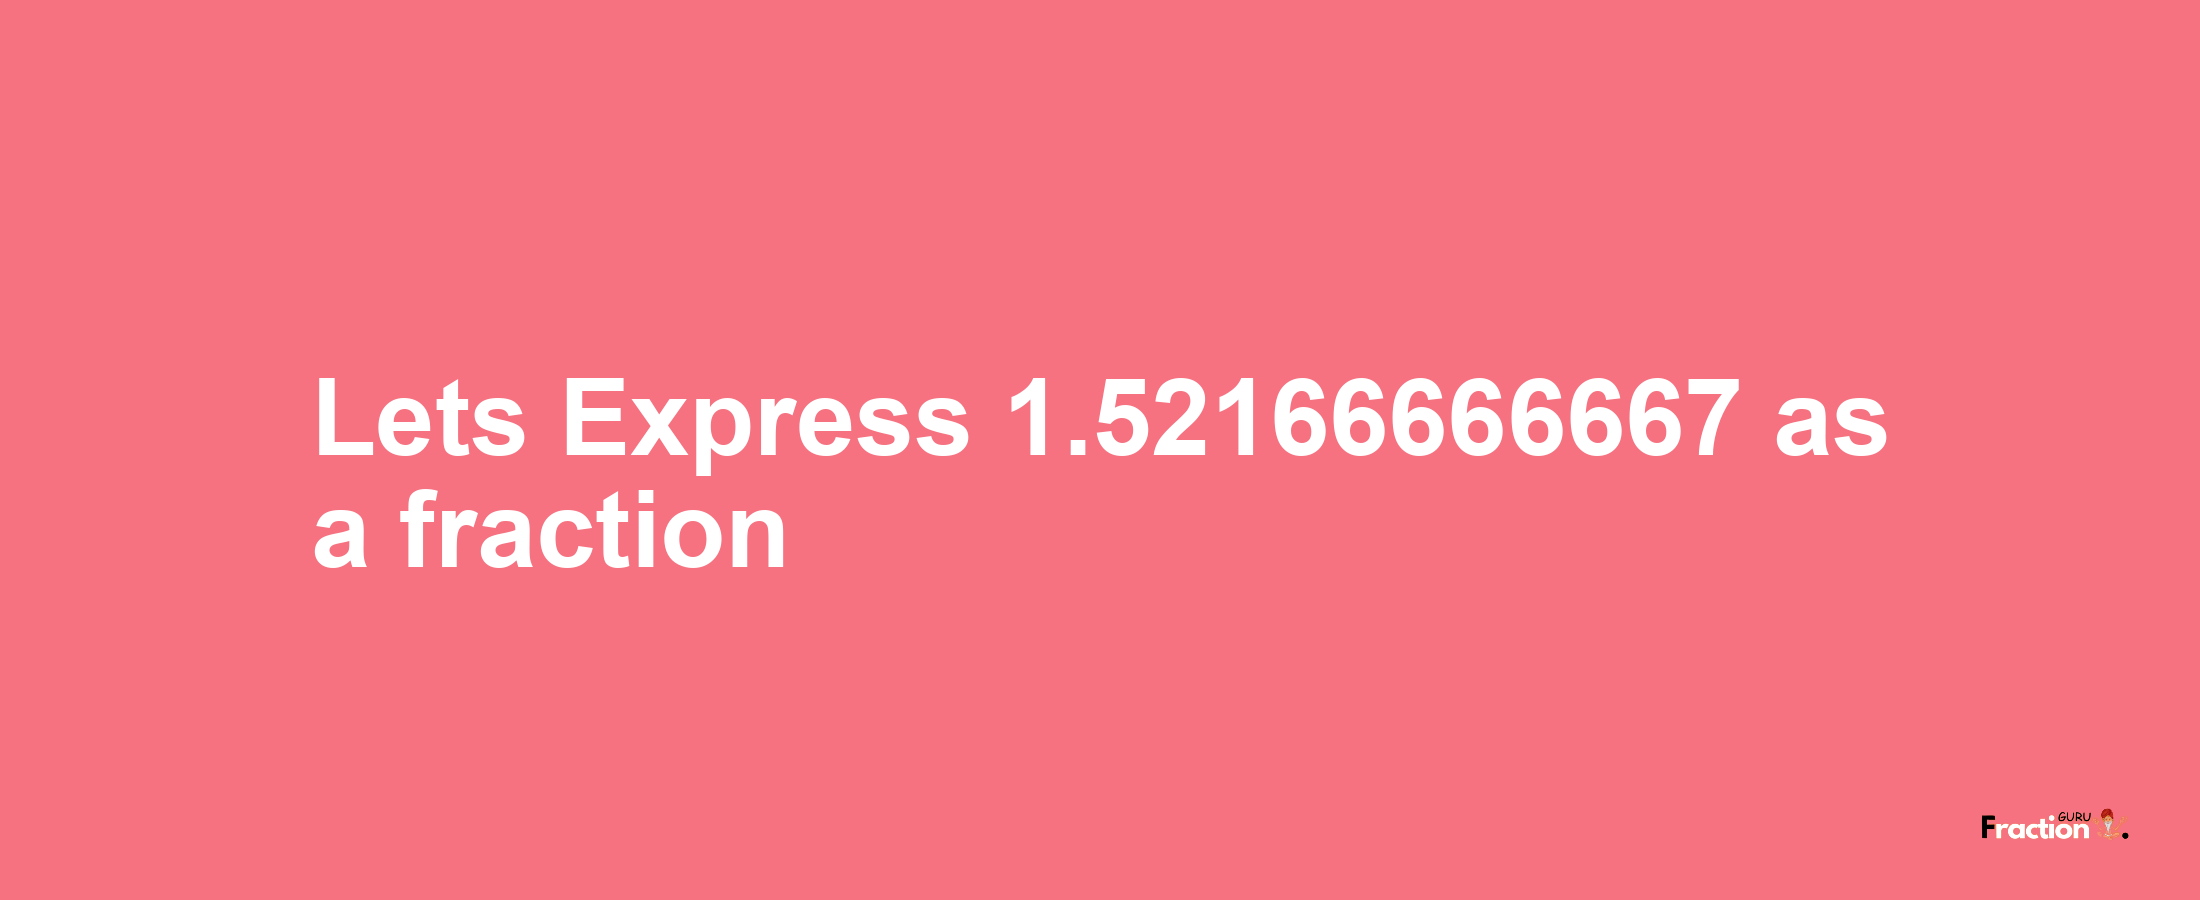 Lets Express 1.52166666667 as afraction